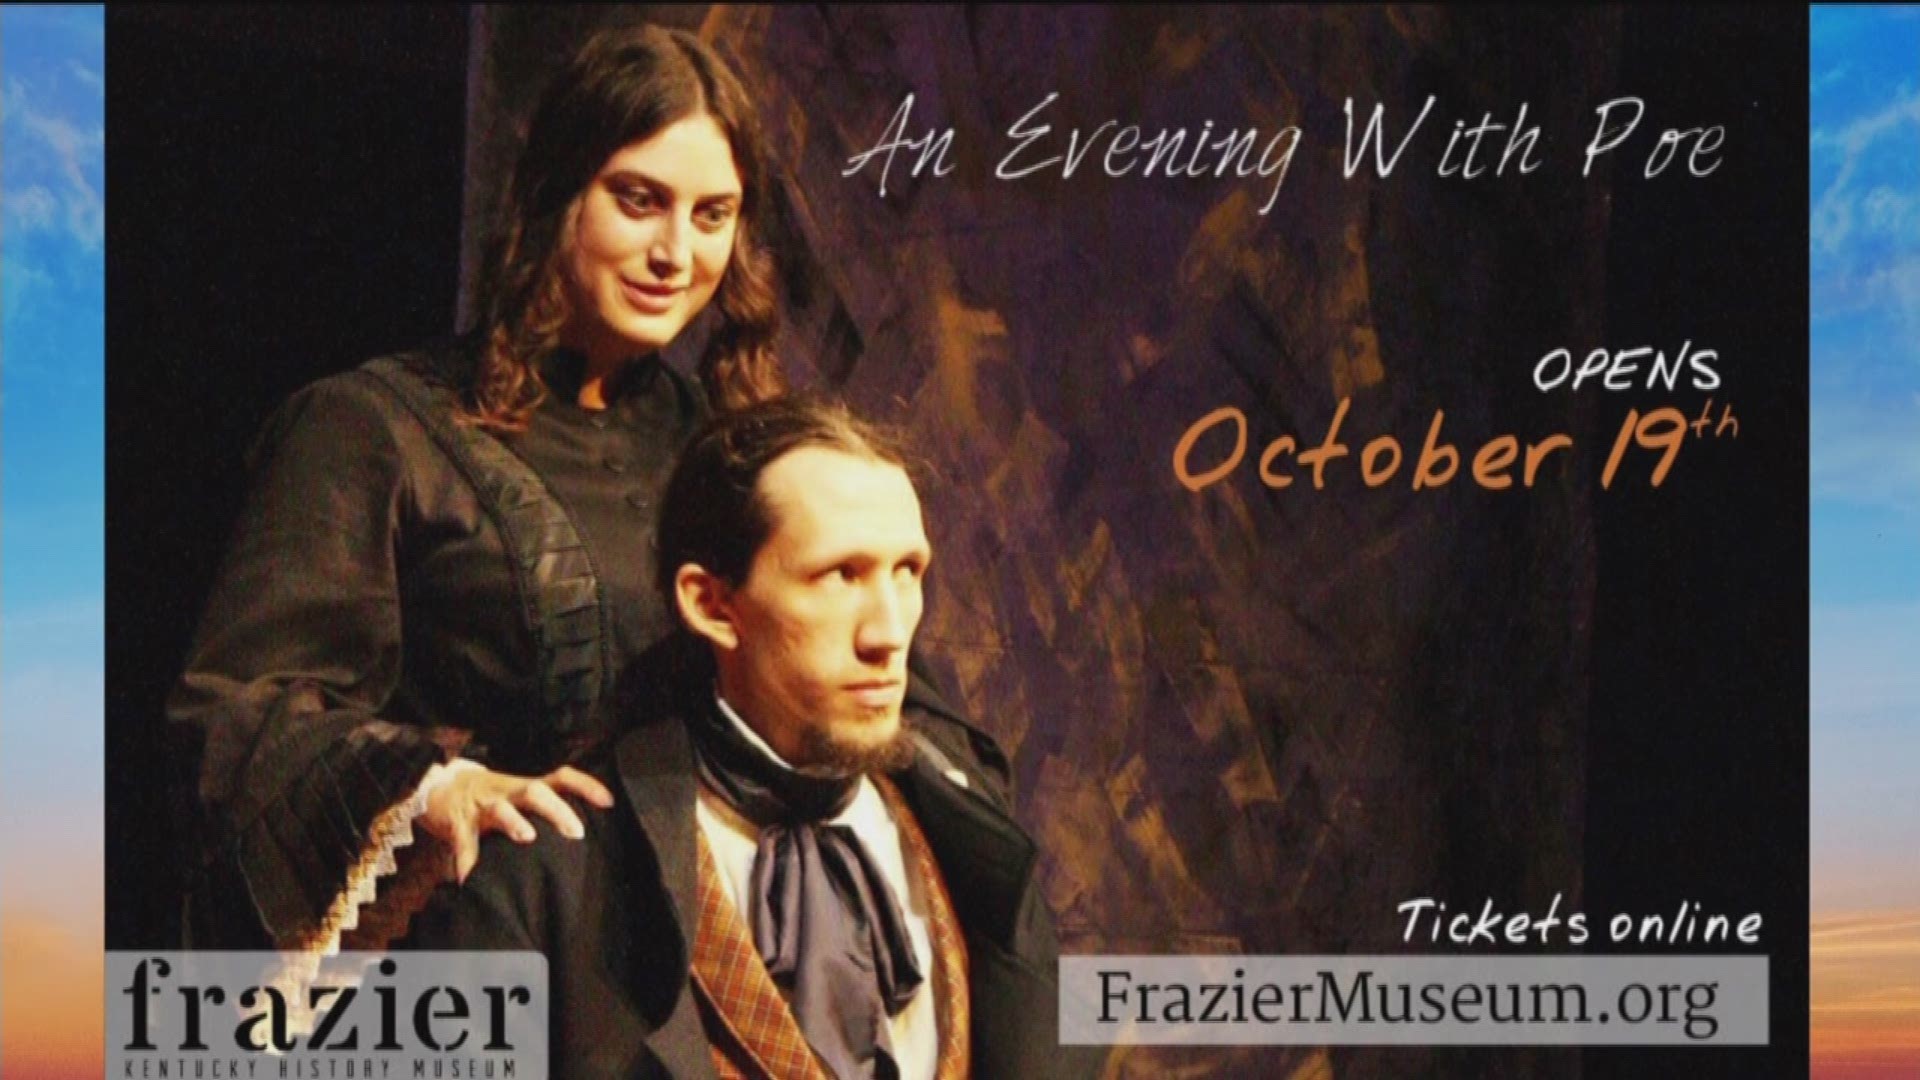 Since 2010, the Frazier History Museum has held an annual celebration of Edgar Allan Poe